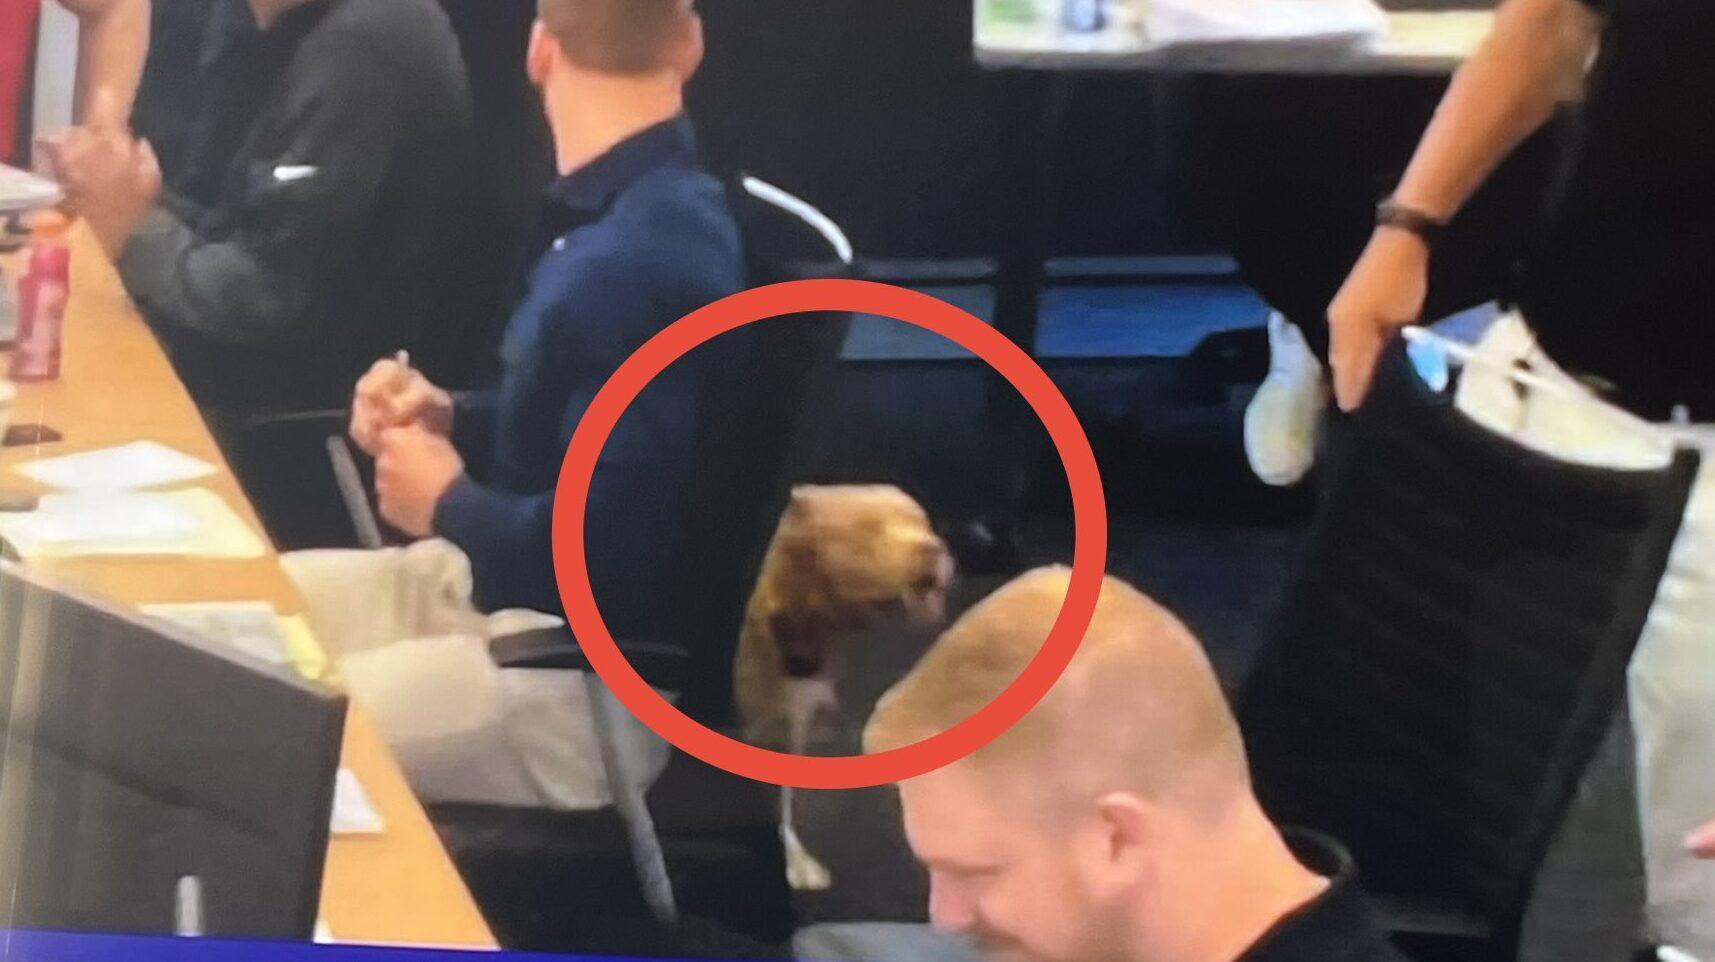 Bow wow: Fans all for good dog in Cardinals’ NFL Draft war room